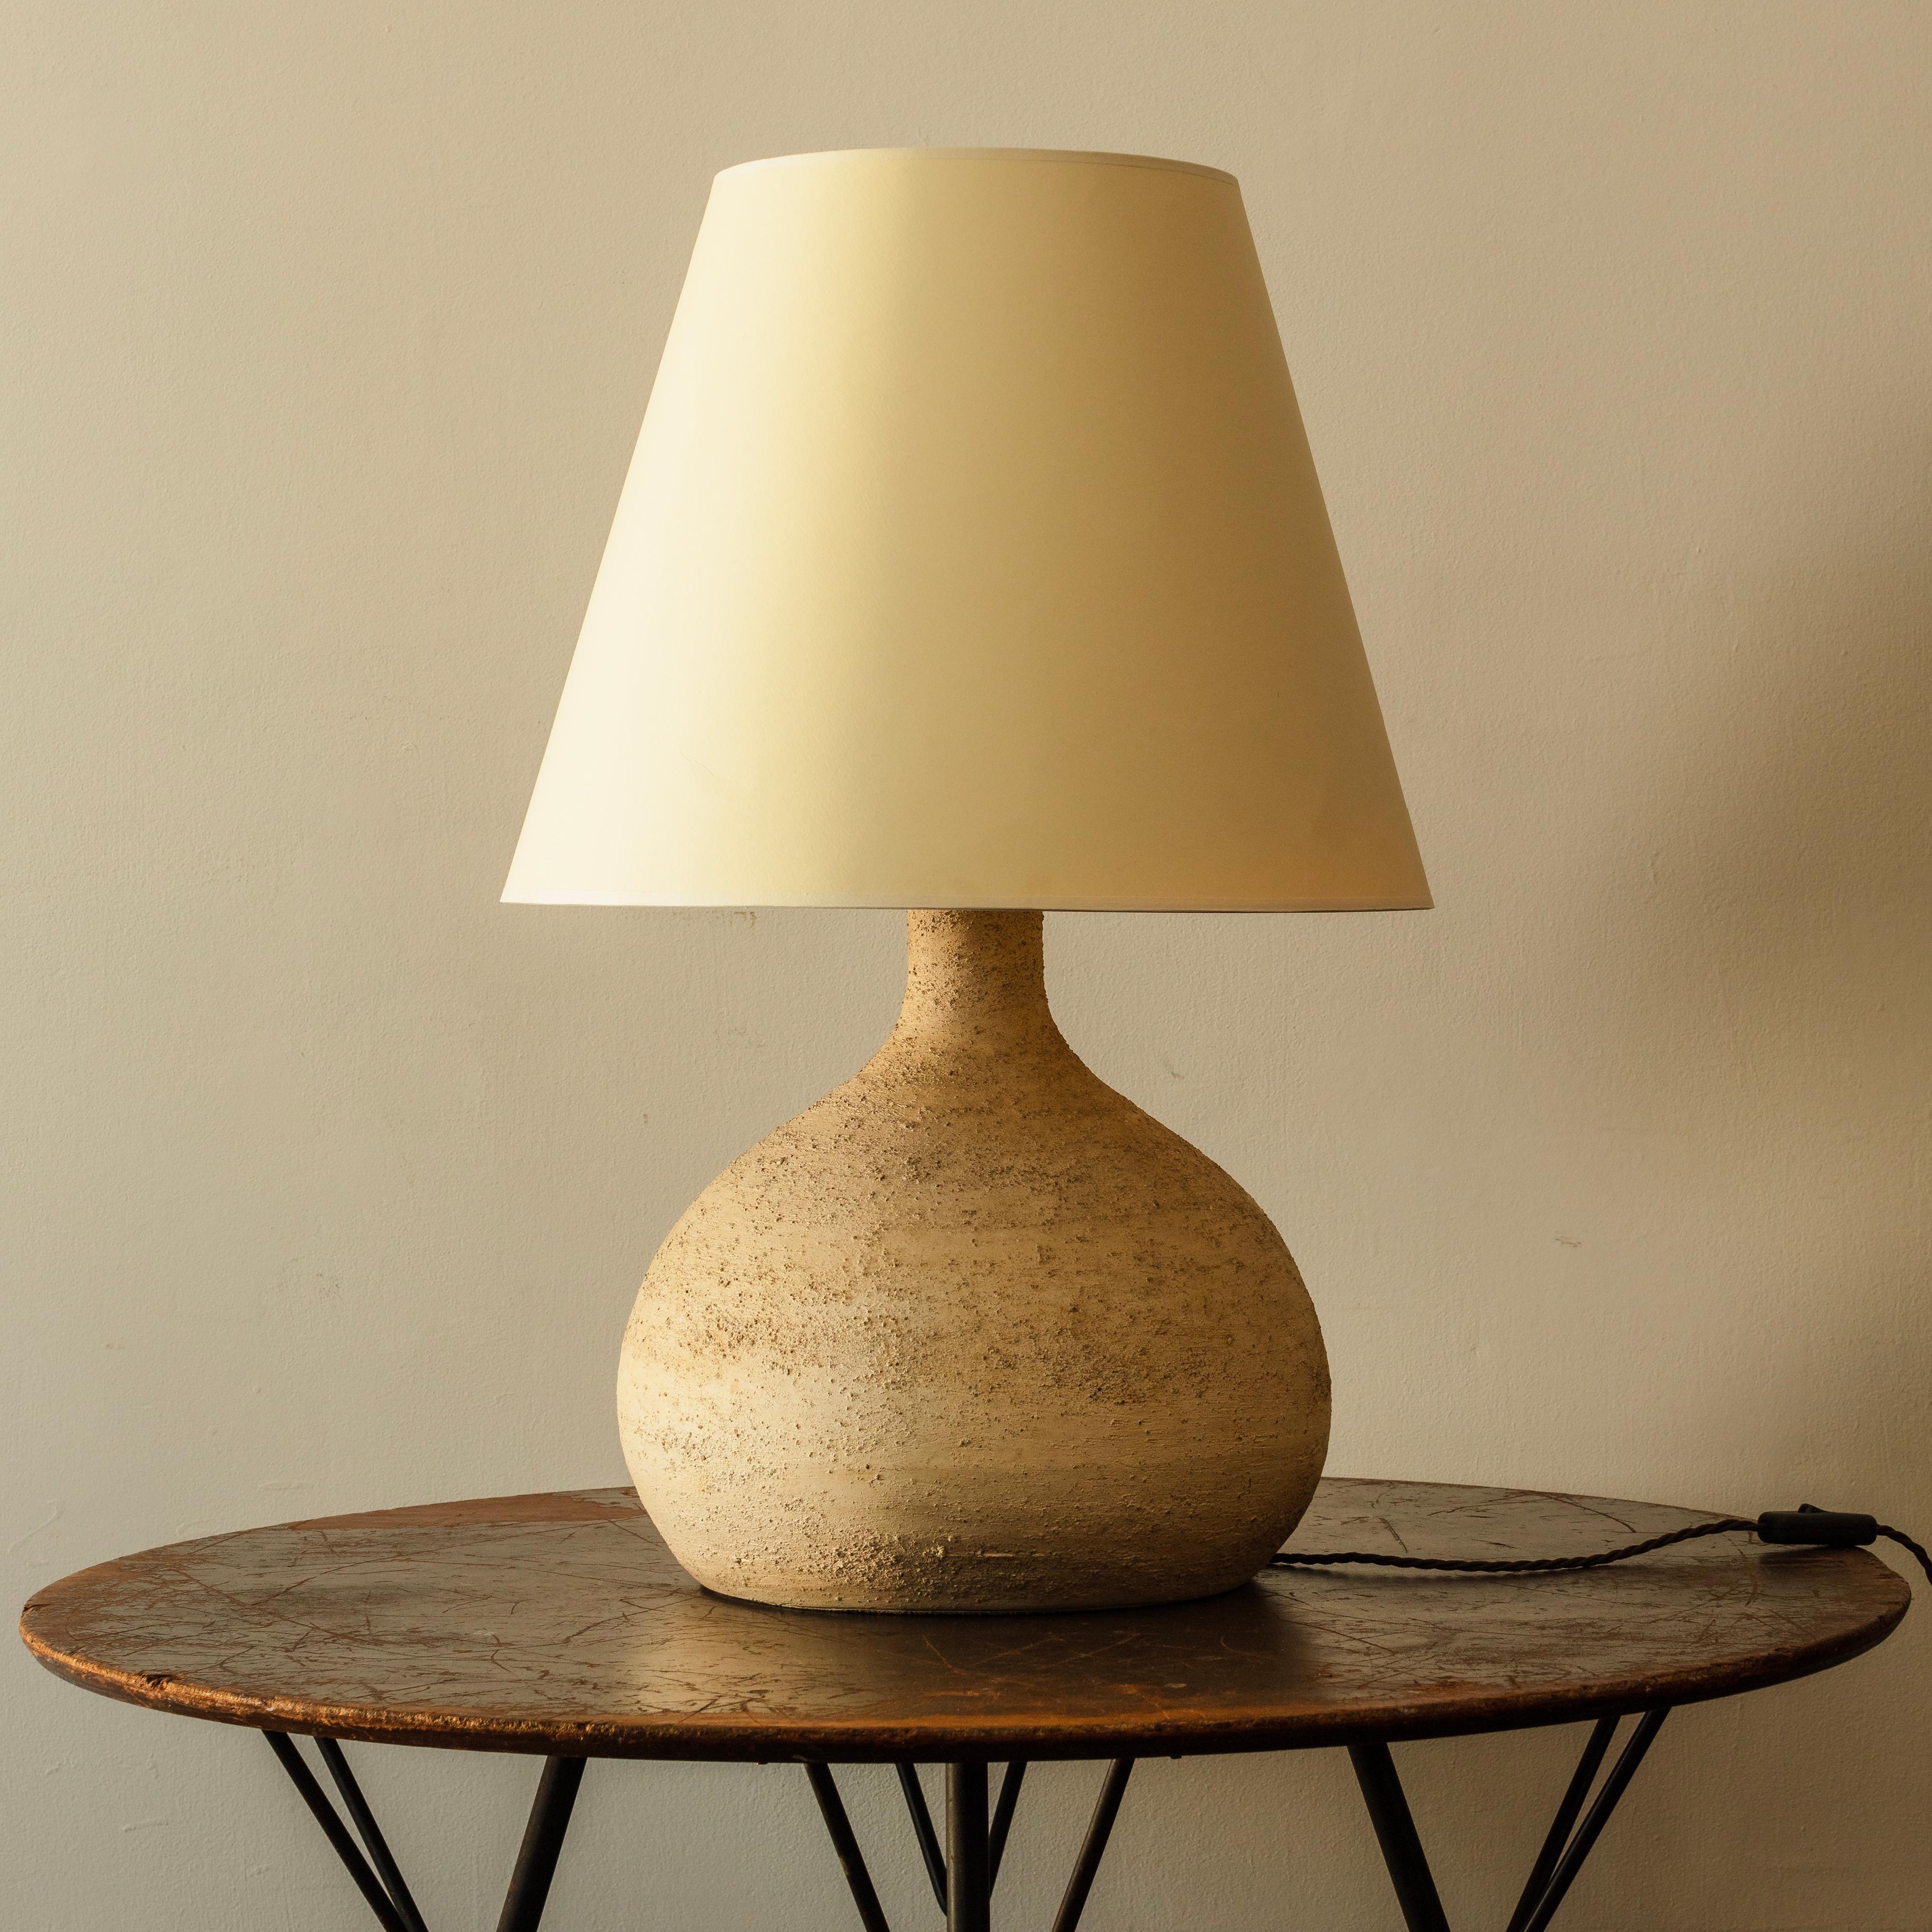 Heavily textured ceramic table lamp base with neutral card shade. Good large size.
South of France, 1960s

Dimensions: H71cm to top of shade x 32cm base diameter.
  